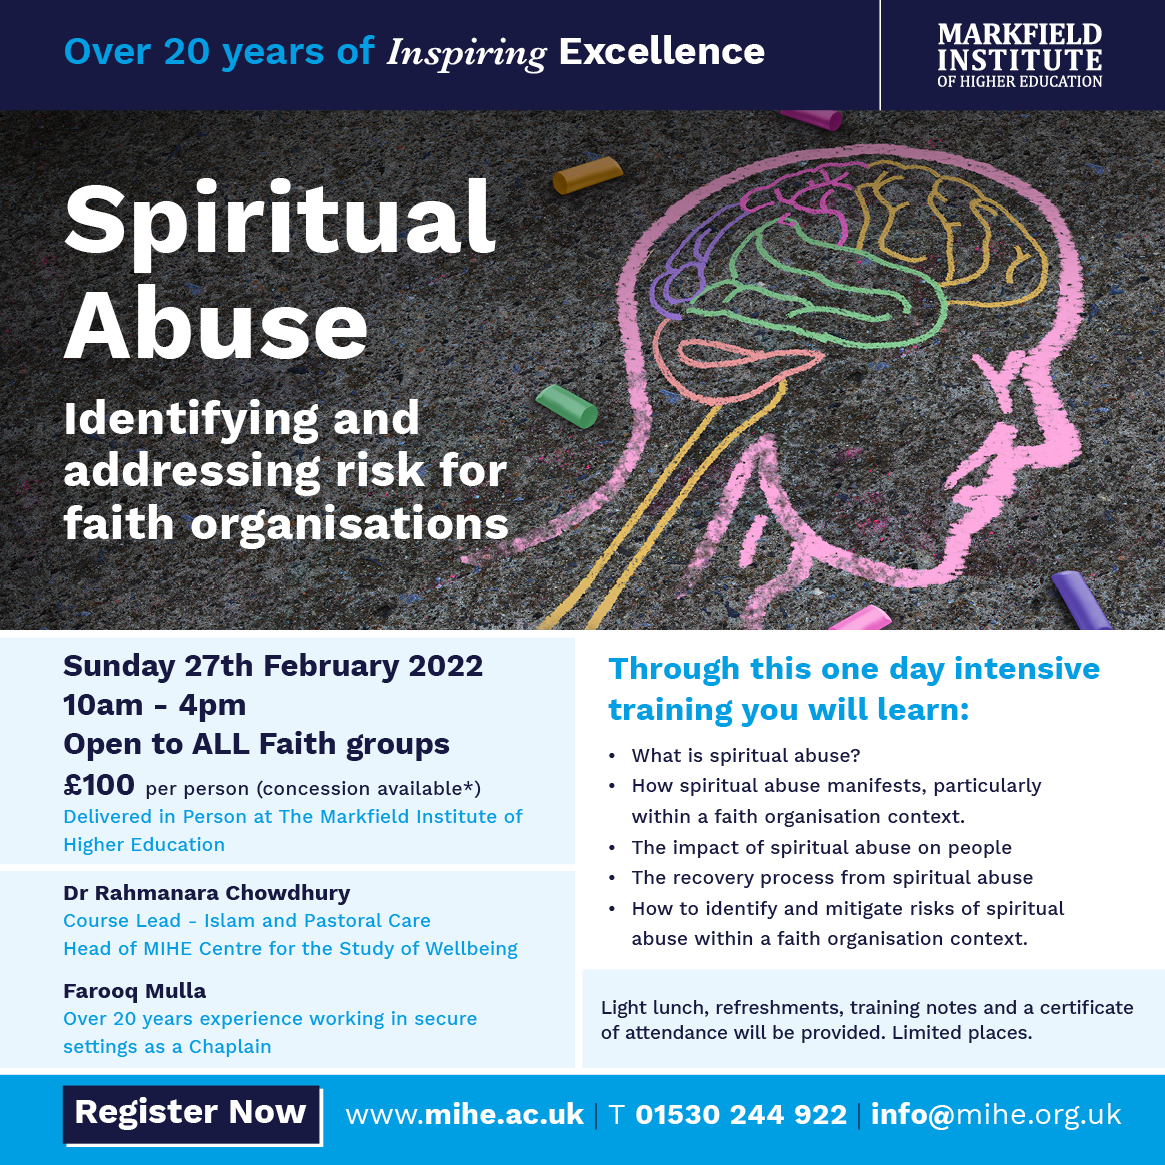 Spiritual Abuse: Identifying and addressing risk for faith organisations